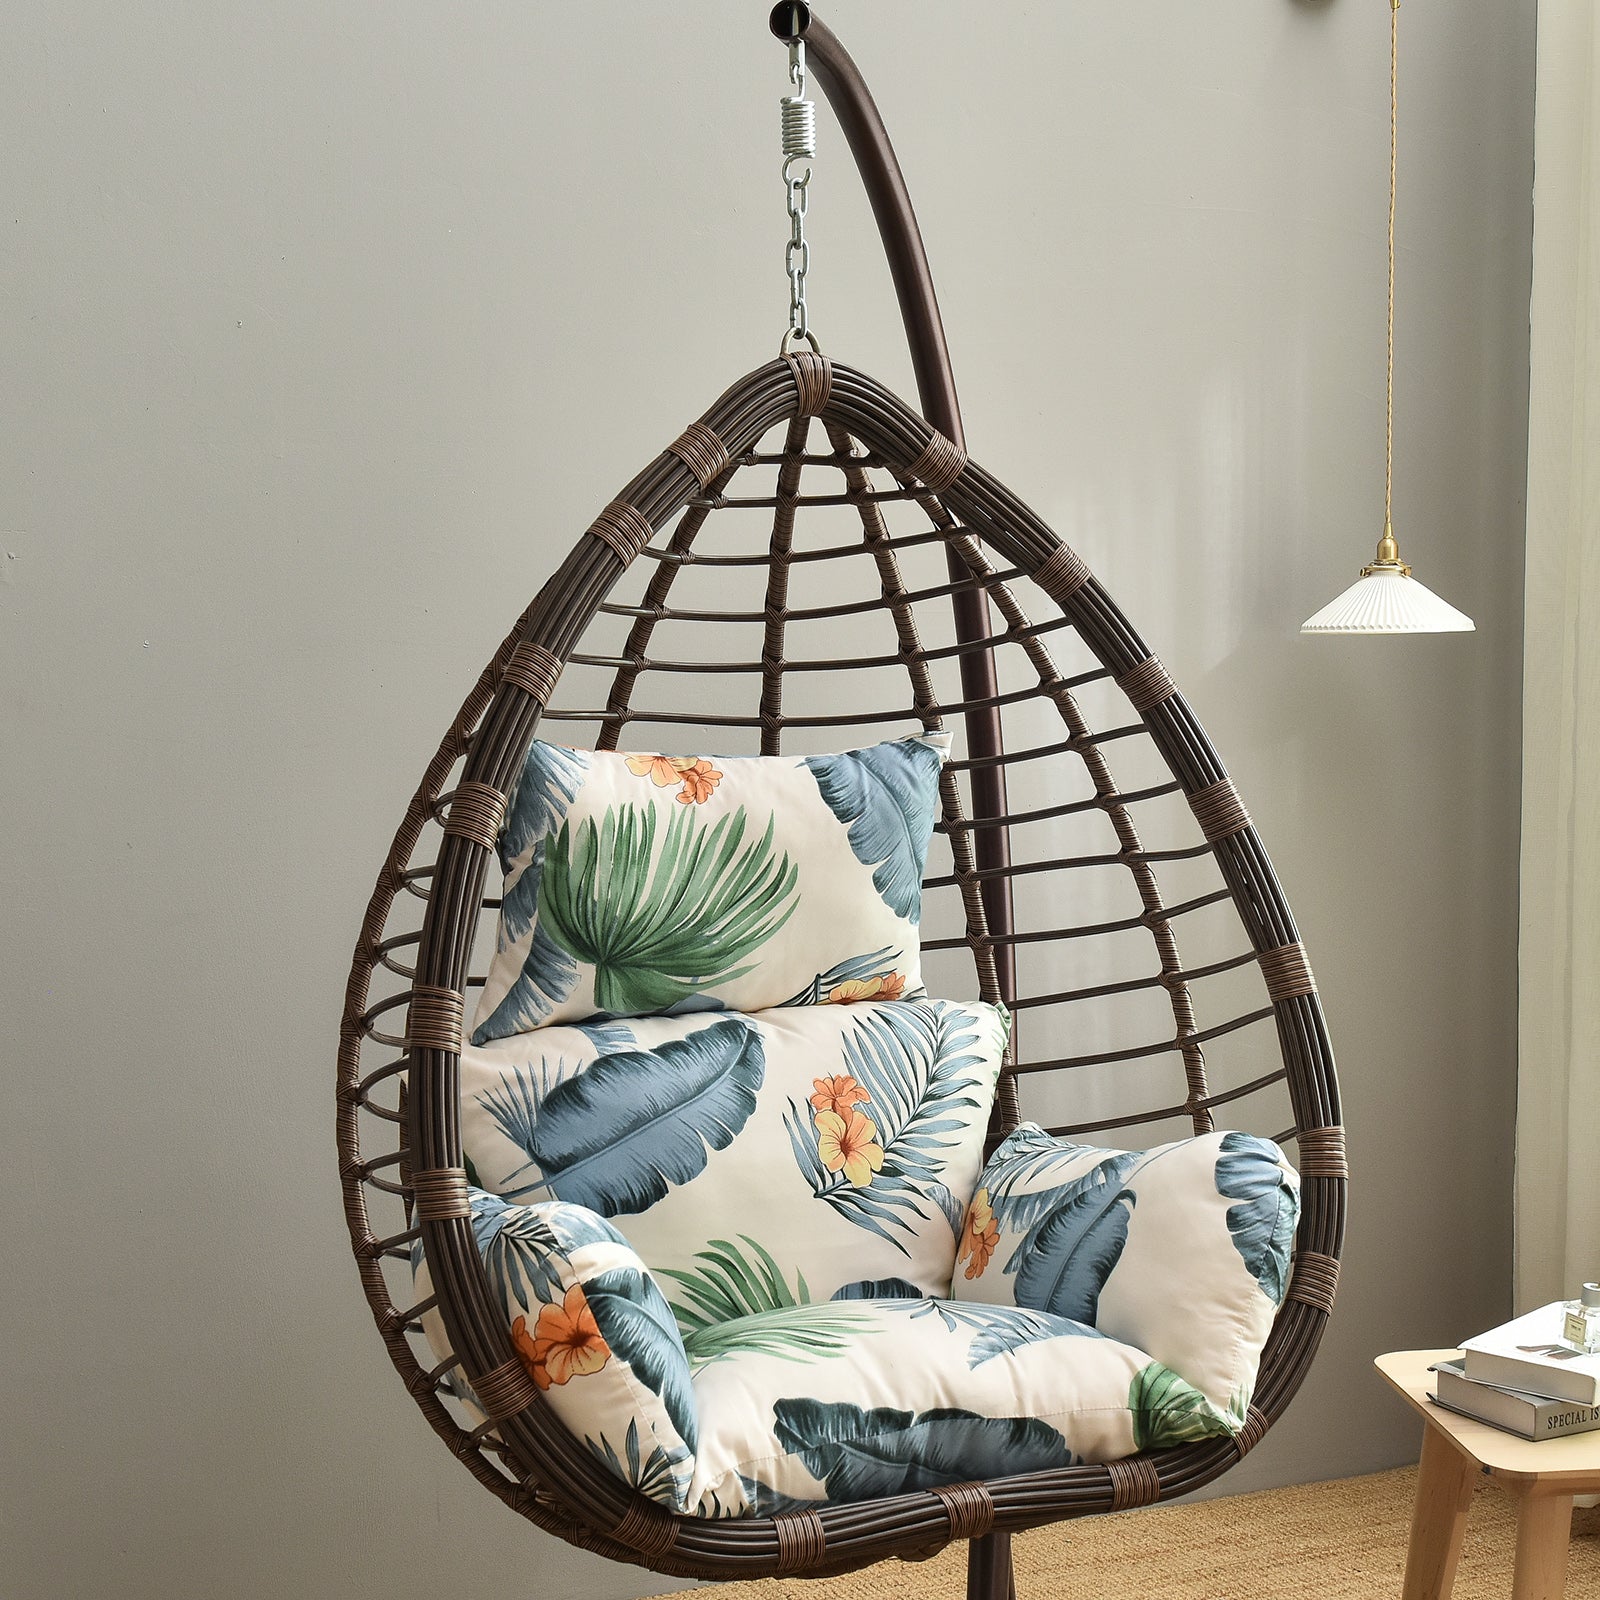 Basket Chair Cushion Indoor/Outdoor Egg Chair Cushions Thicken Hanging Chair Cushion 6 Style Chair cover (No Hammock)